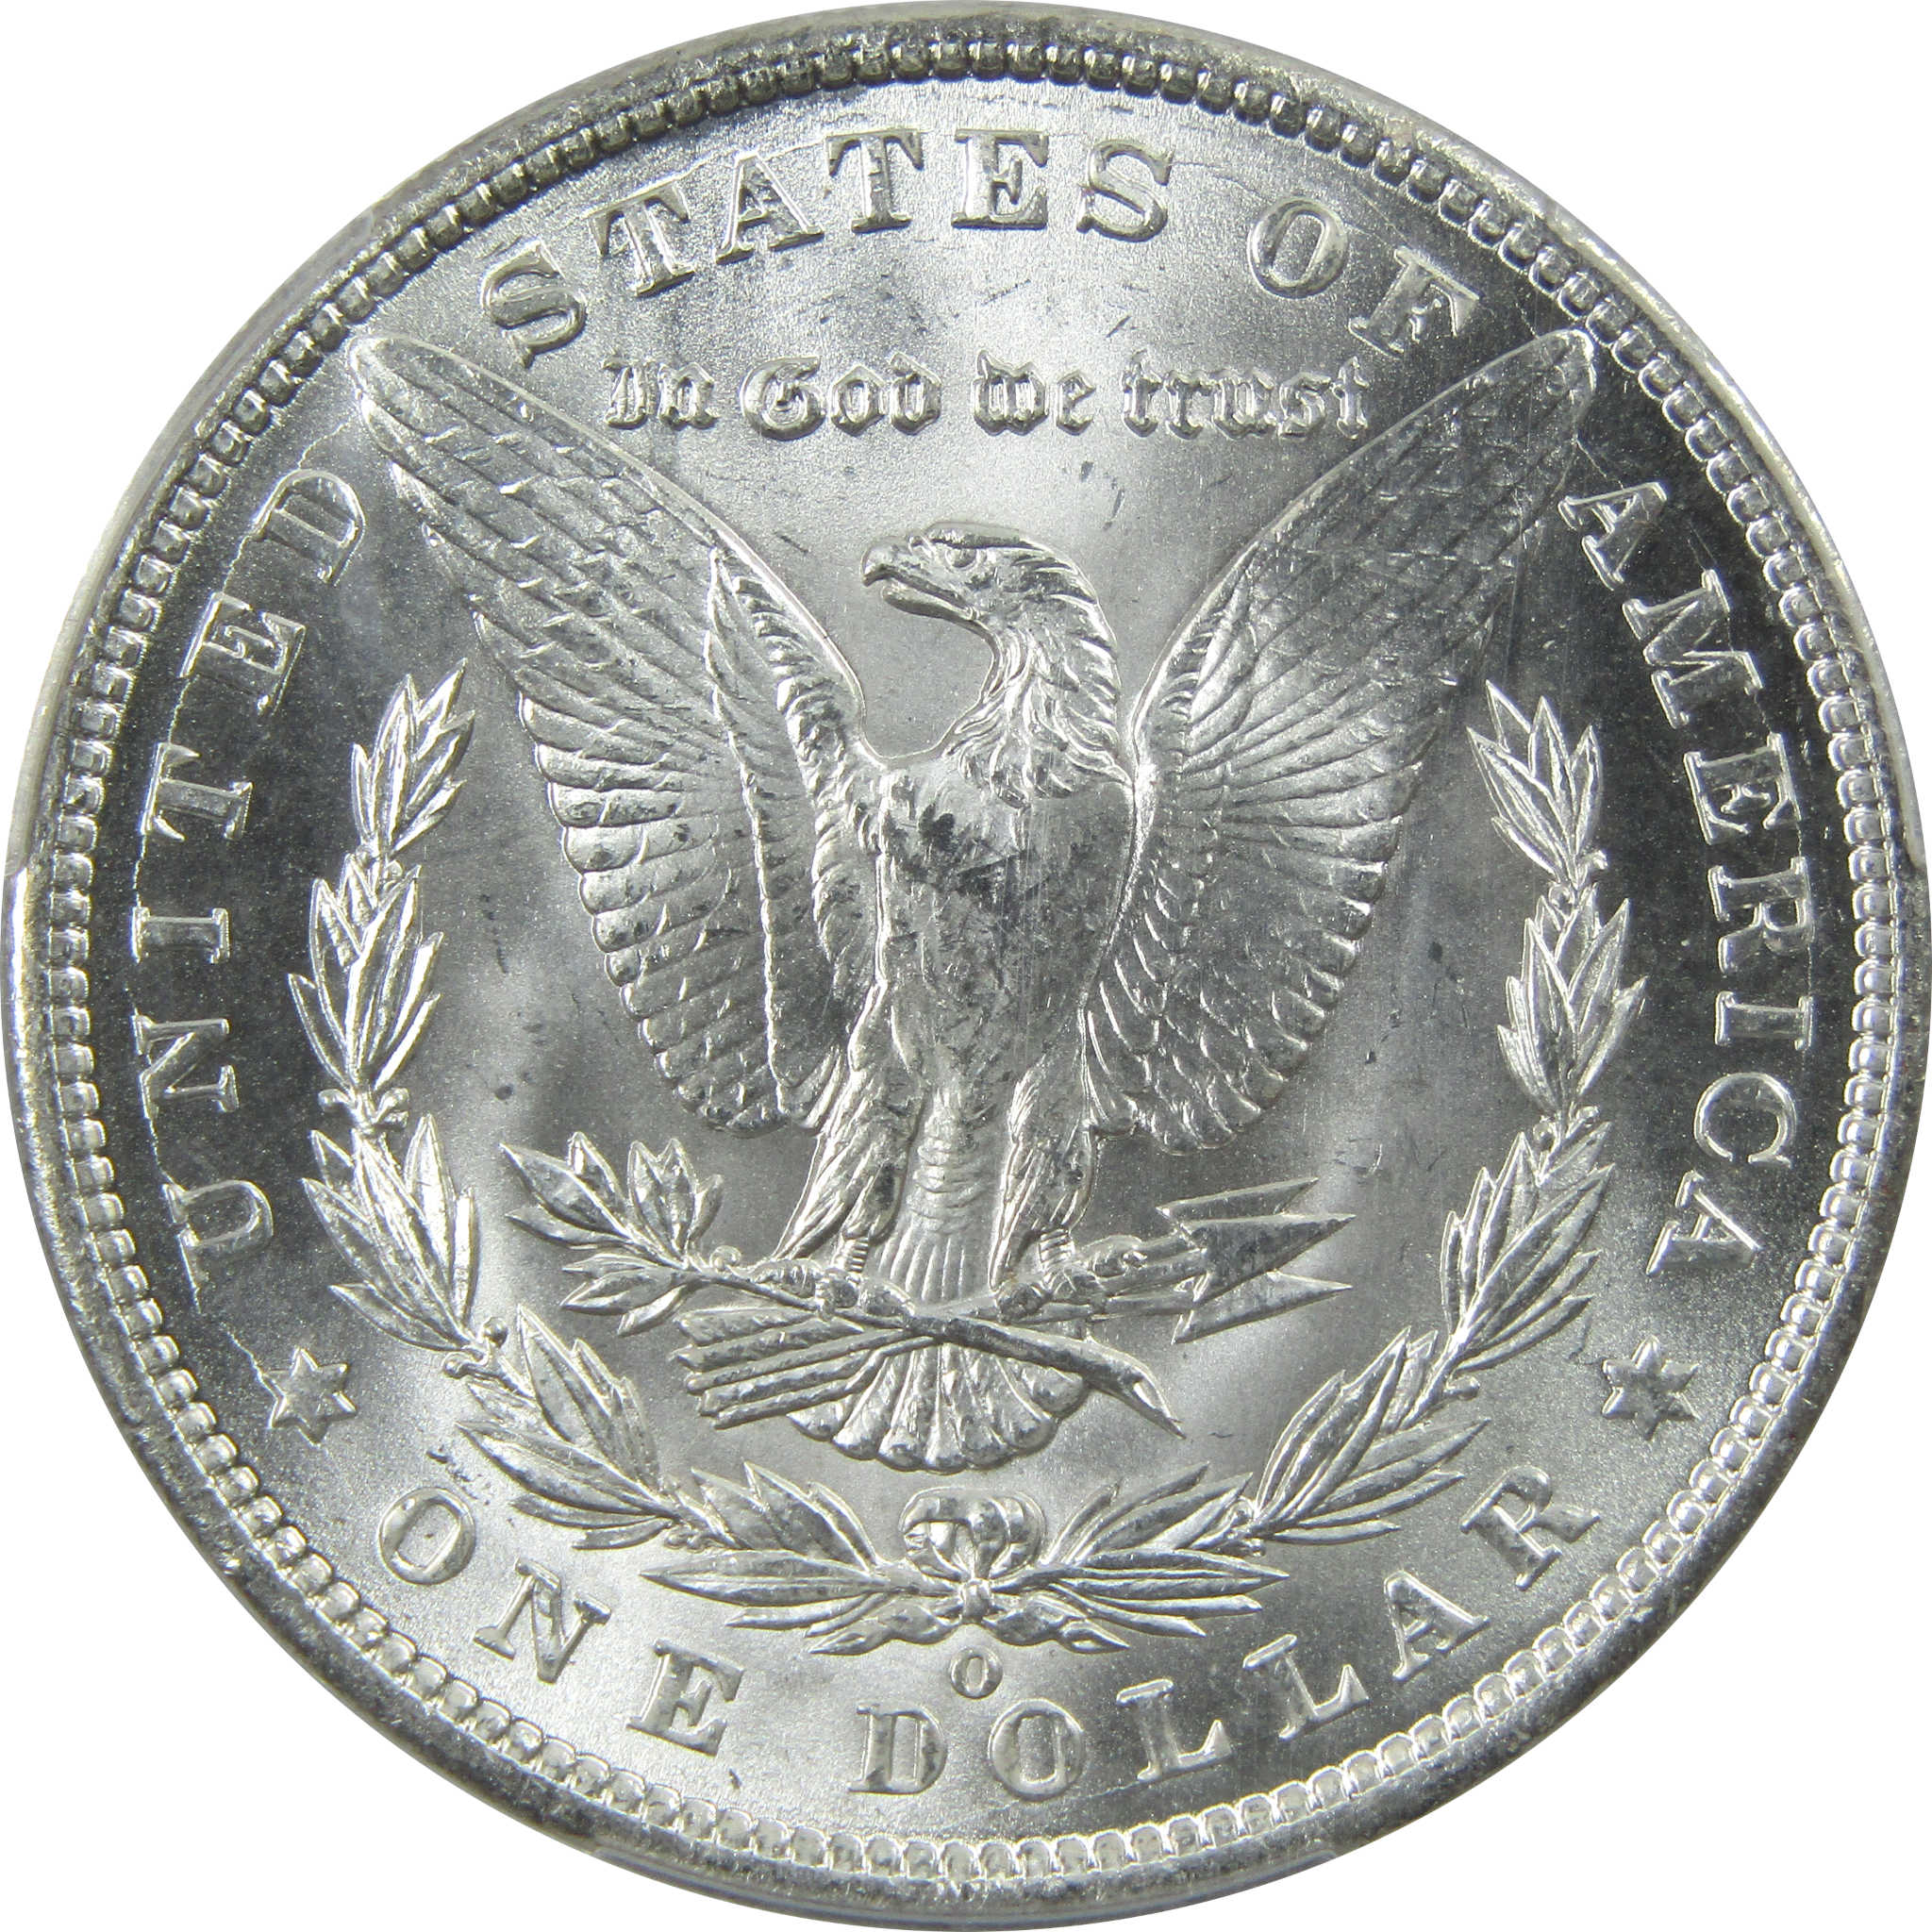 1900 O Morgan Dollar MS 64 PCGS Silver $1 Uncirculated Coin SKU:I13785 - Morgan coin - Morgan silver dollar - Morgan silver dollar for sale - Profile Coins &amp; Collectibles